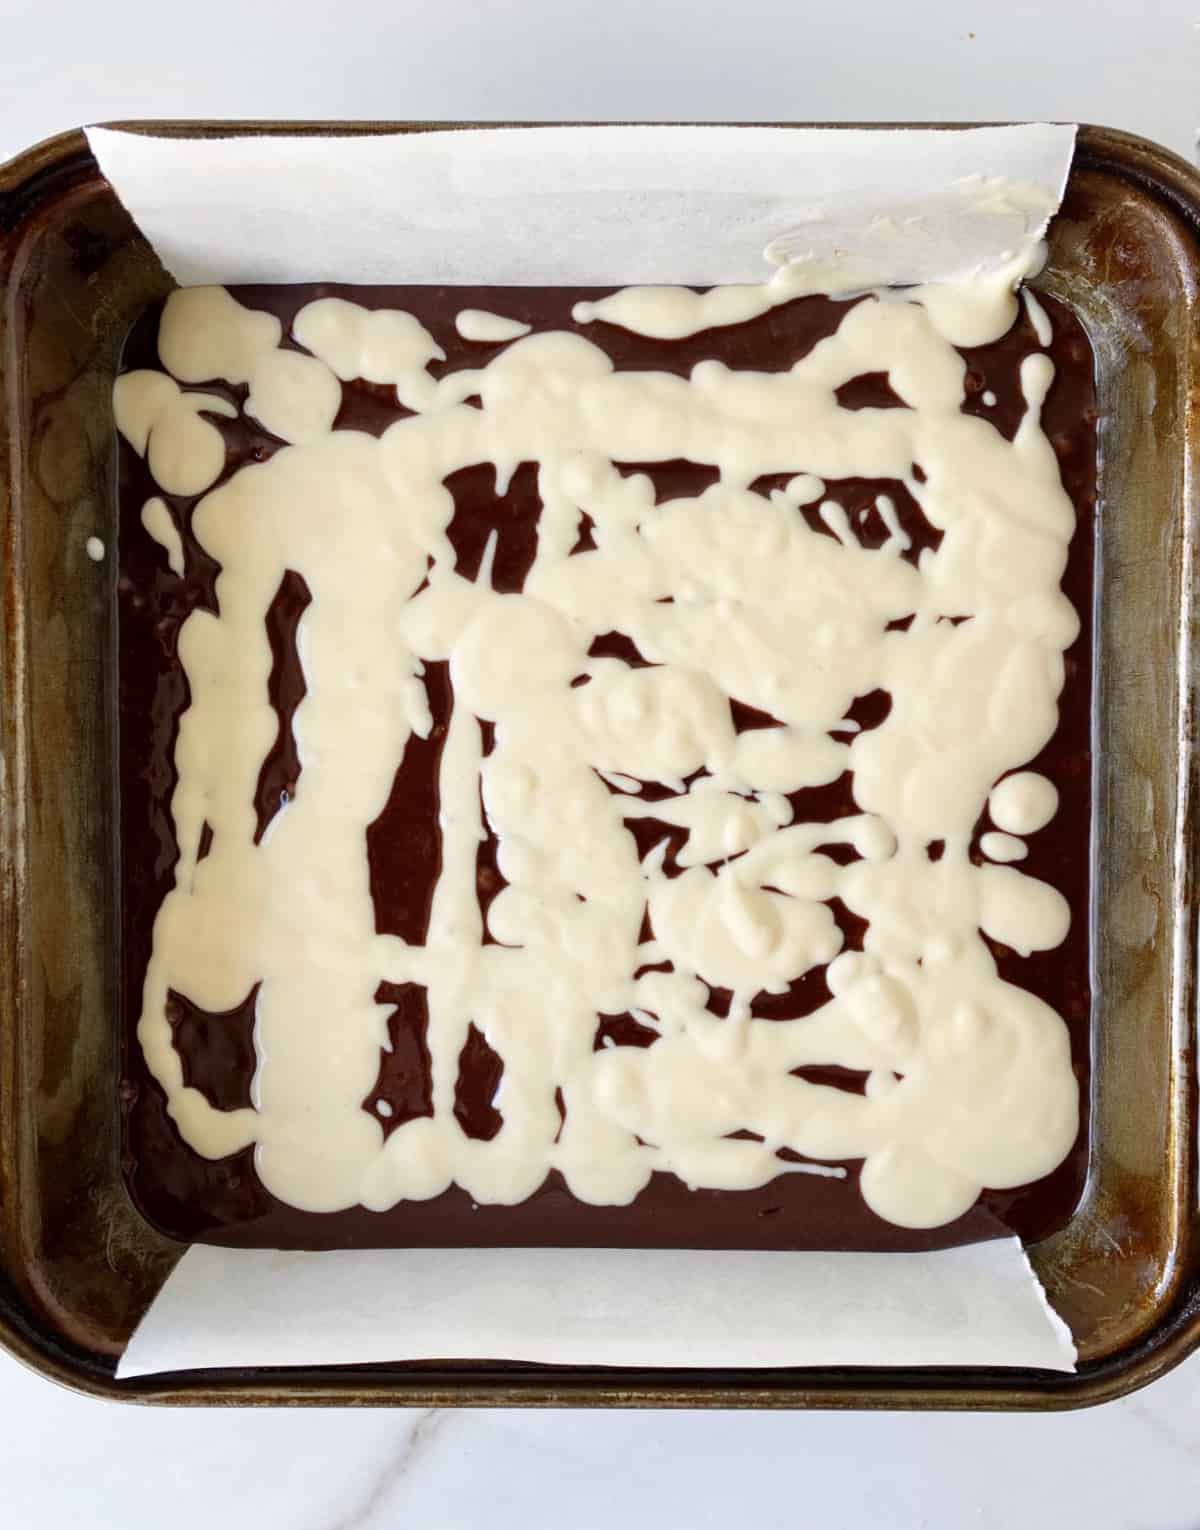 Top view of brownie cheesecake batters in a metal square pan.